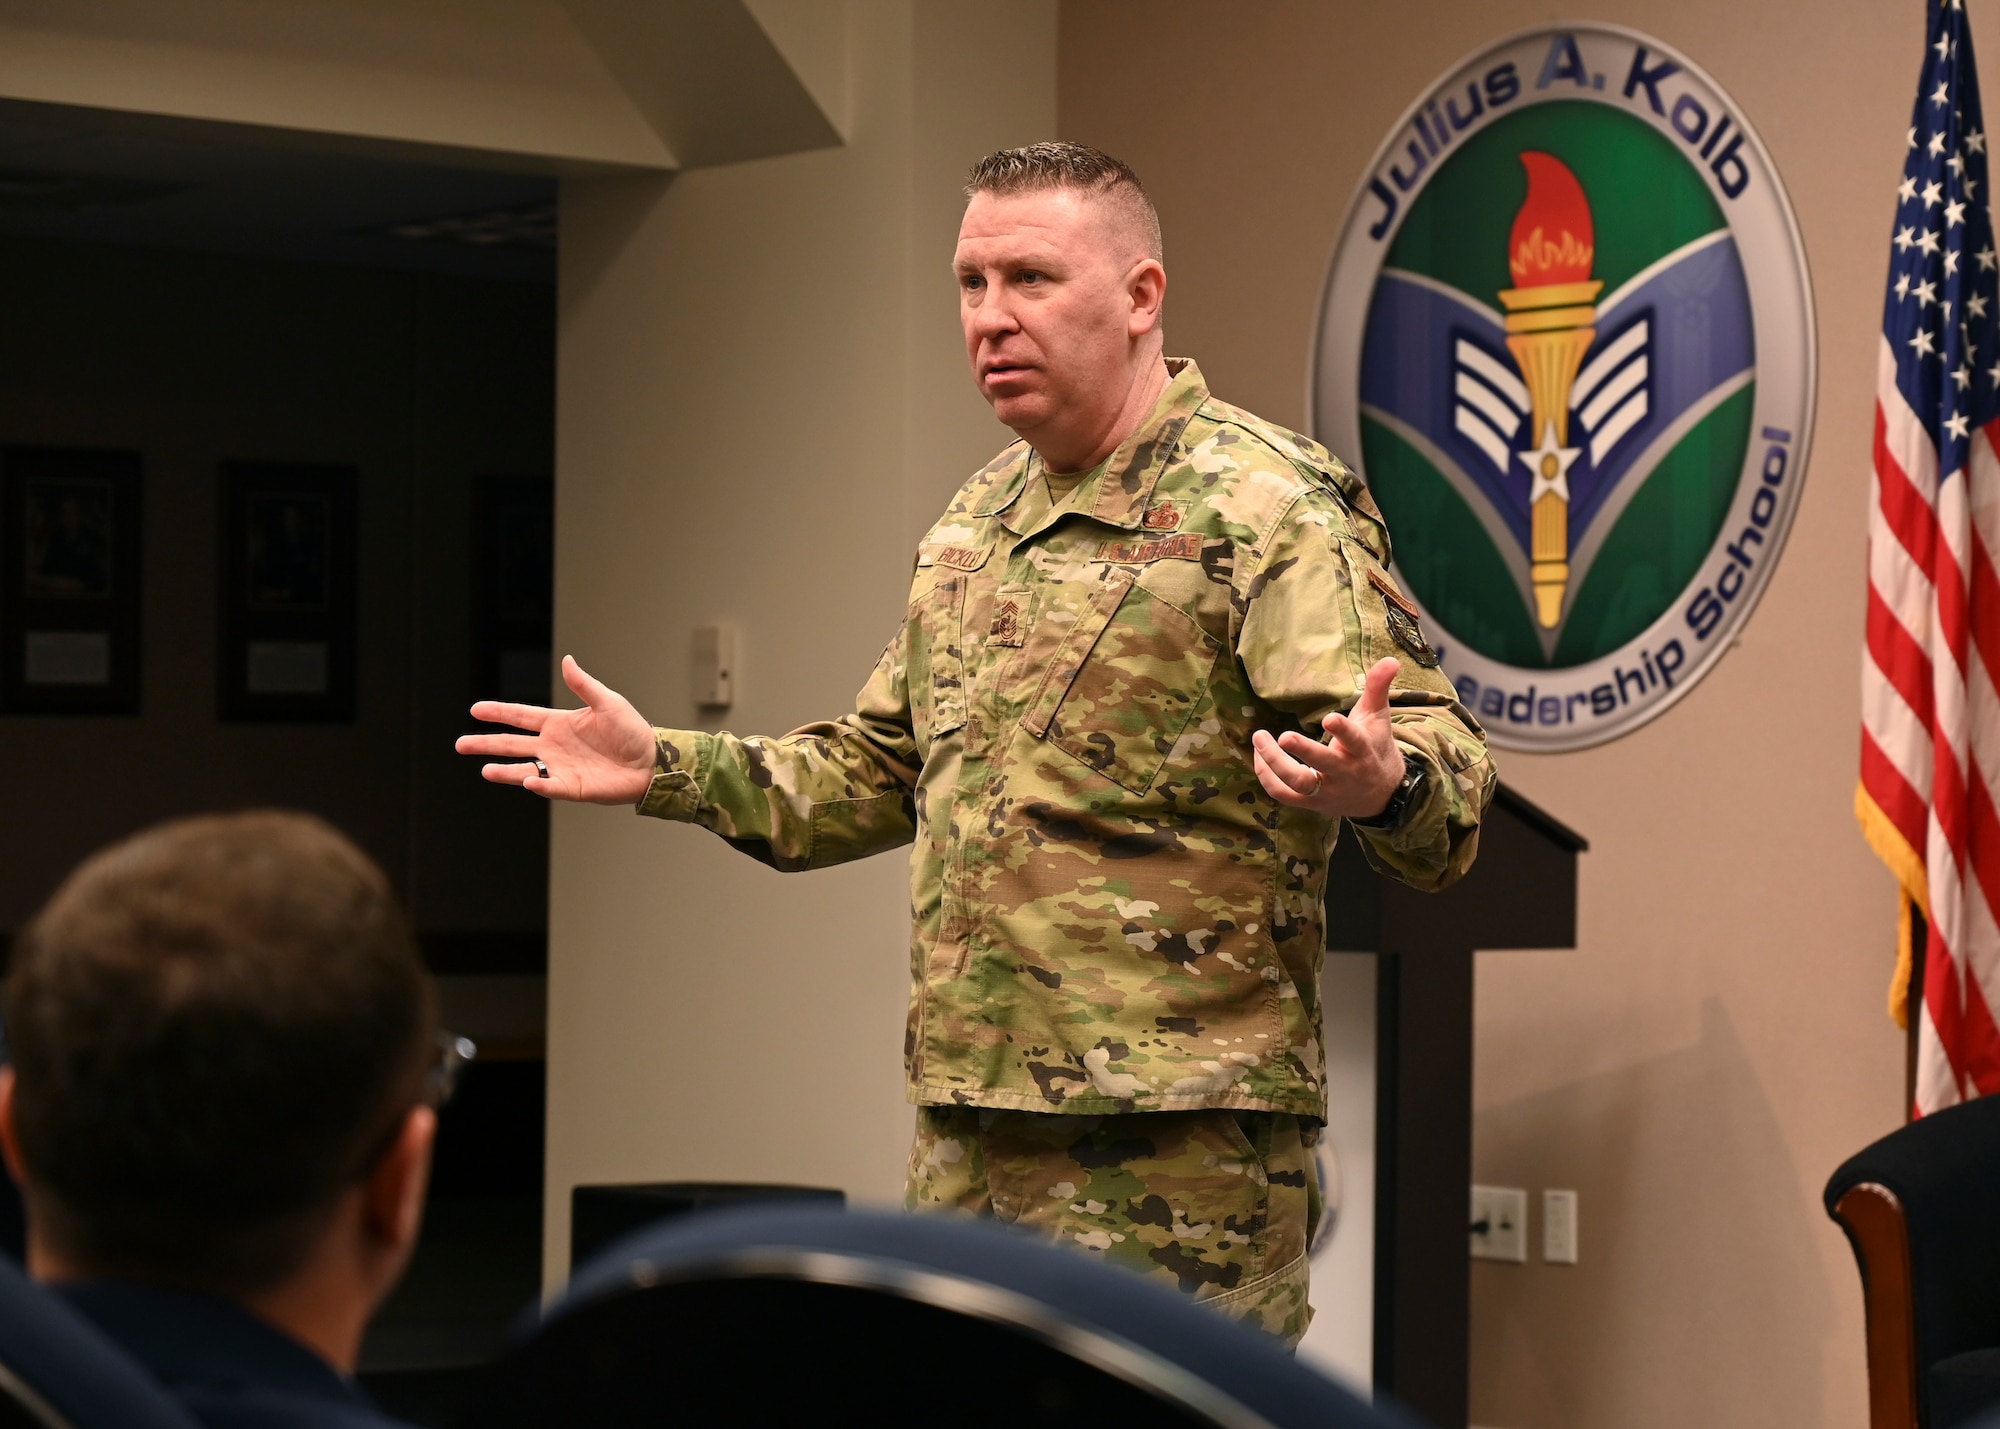 U.S. Air Force Chief Master Sgt. Chad Bickley, 18th Air Force command chief, met with the Julius A. Kolb Airman Leadership School Class 23-C at Joint Base Lewis-McChord, Washington, March 3, 2023. During Bickley’s visit he spoke with the ALS class, held an all-call with Team McChord, and spoke at the Chief Recognition Ceremony. (U.S. Air Force Senior Airman Callie Norton)